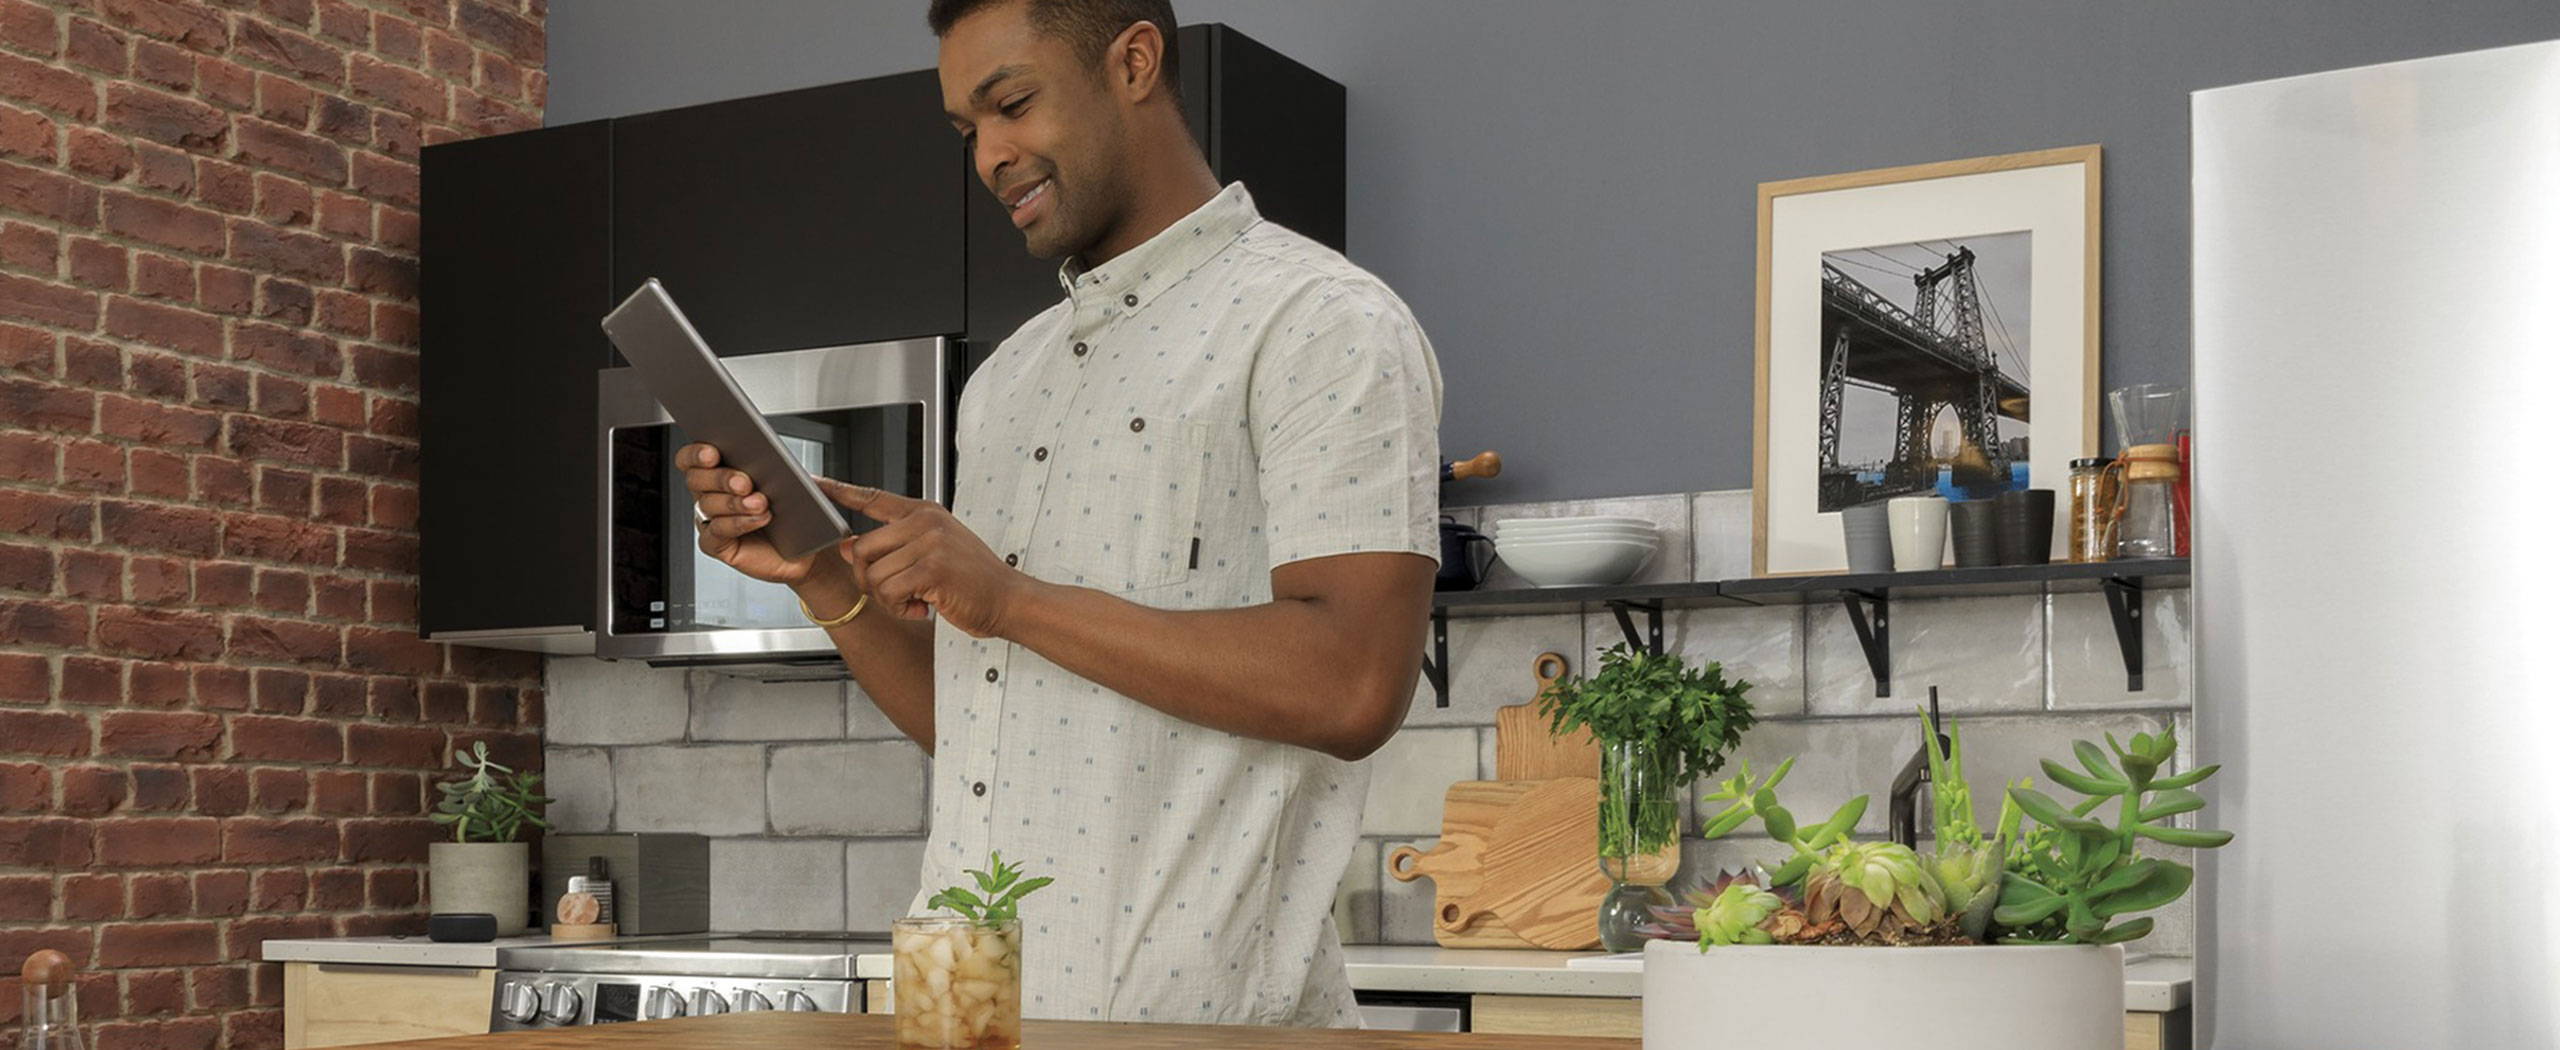 Young african american man checks his iPad while in his kitchen.a